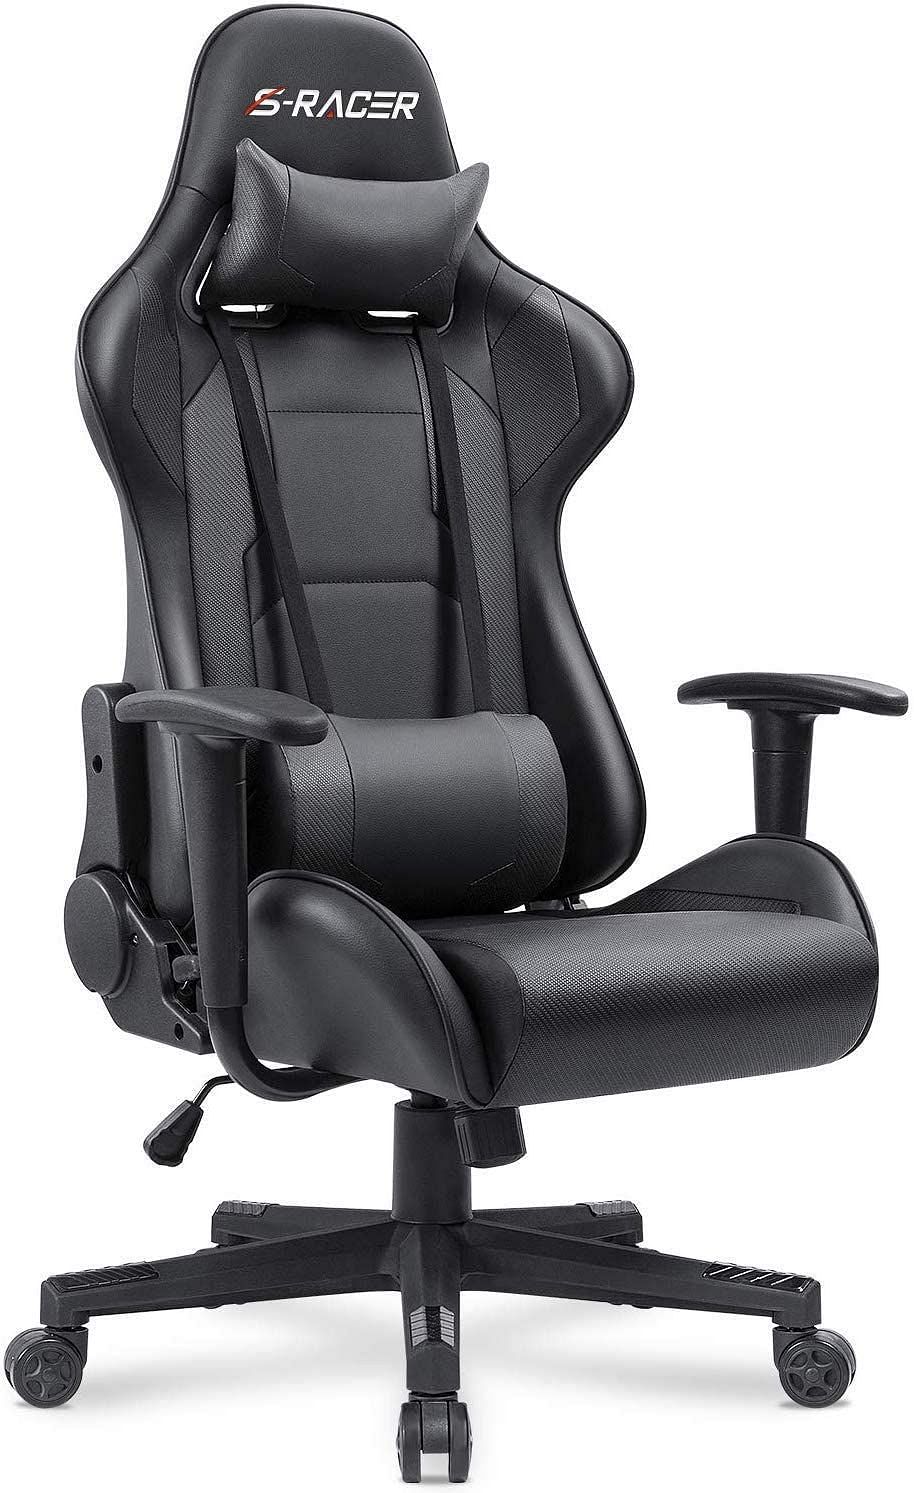 Elegant and comfort fits into one chair (Image via Amazon)